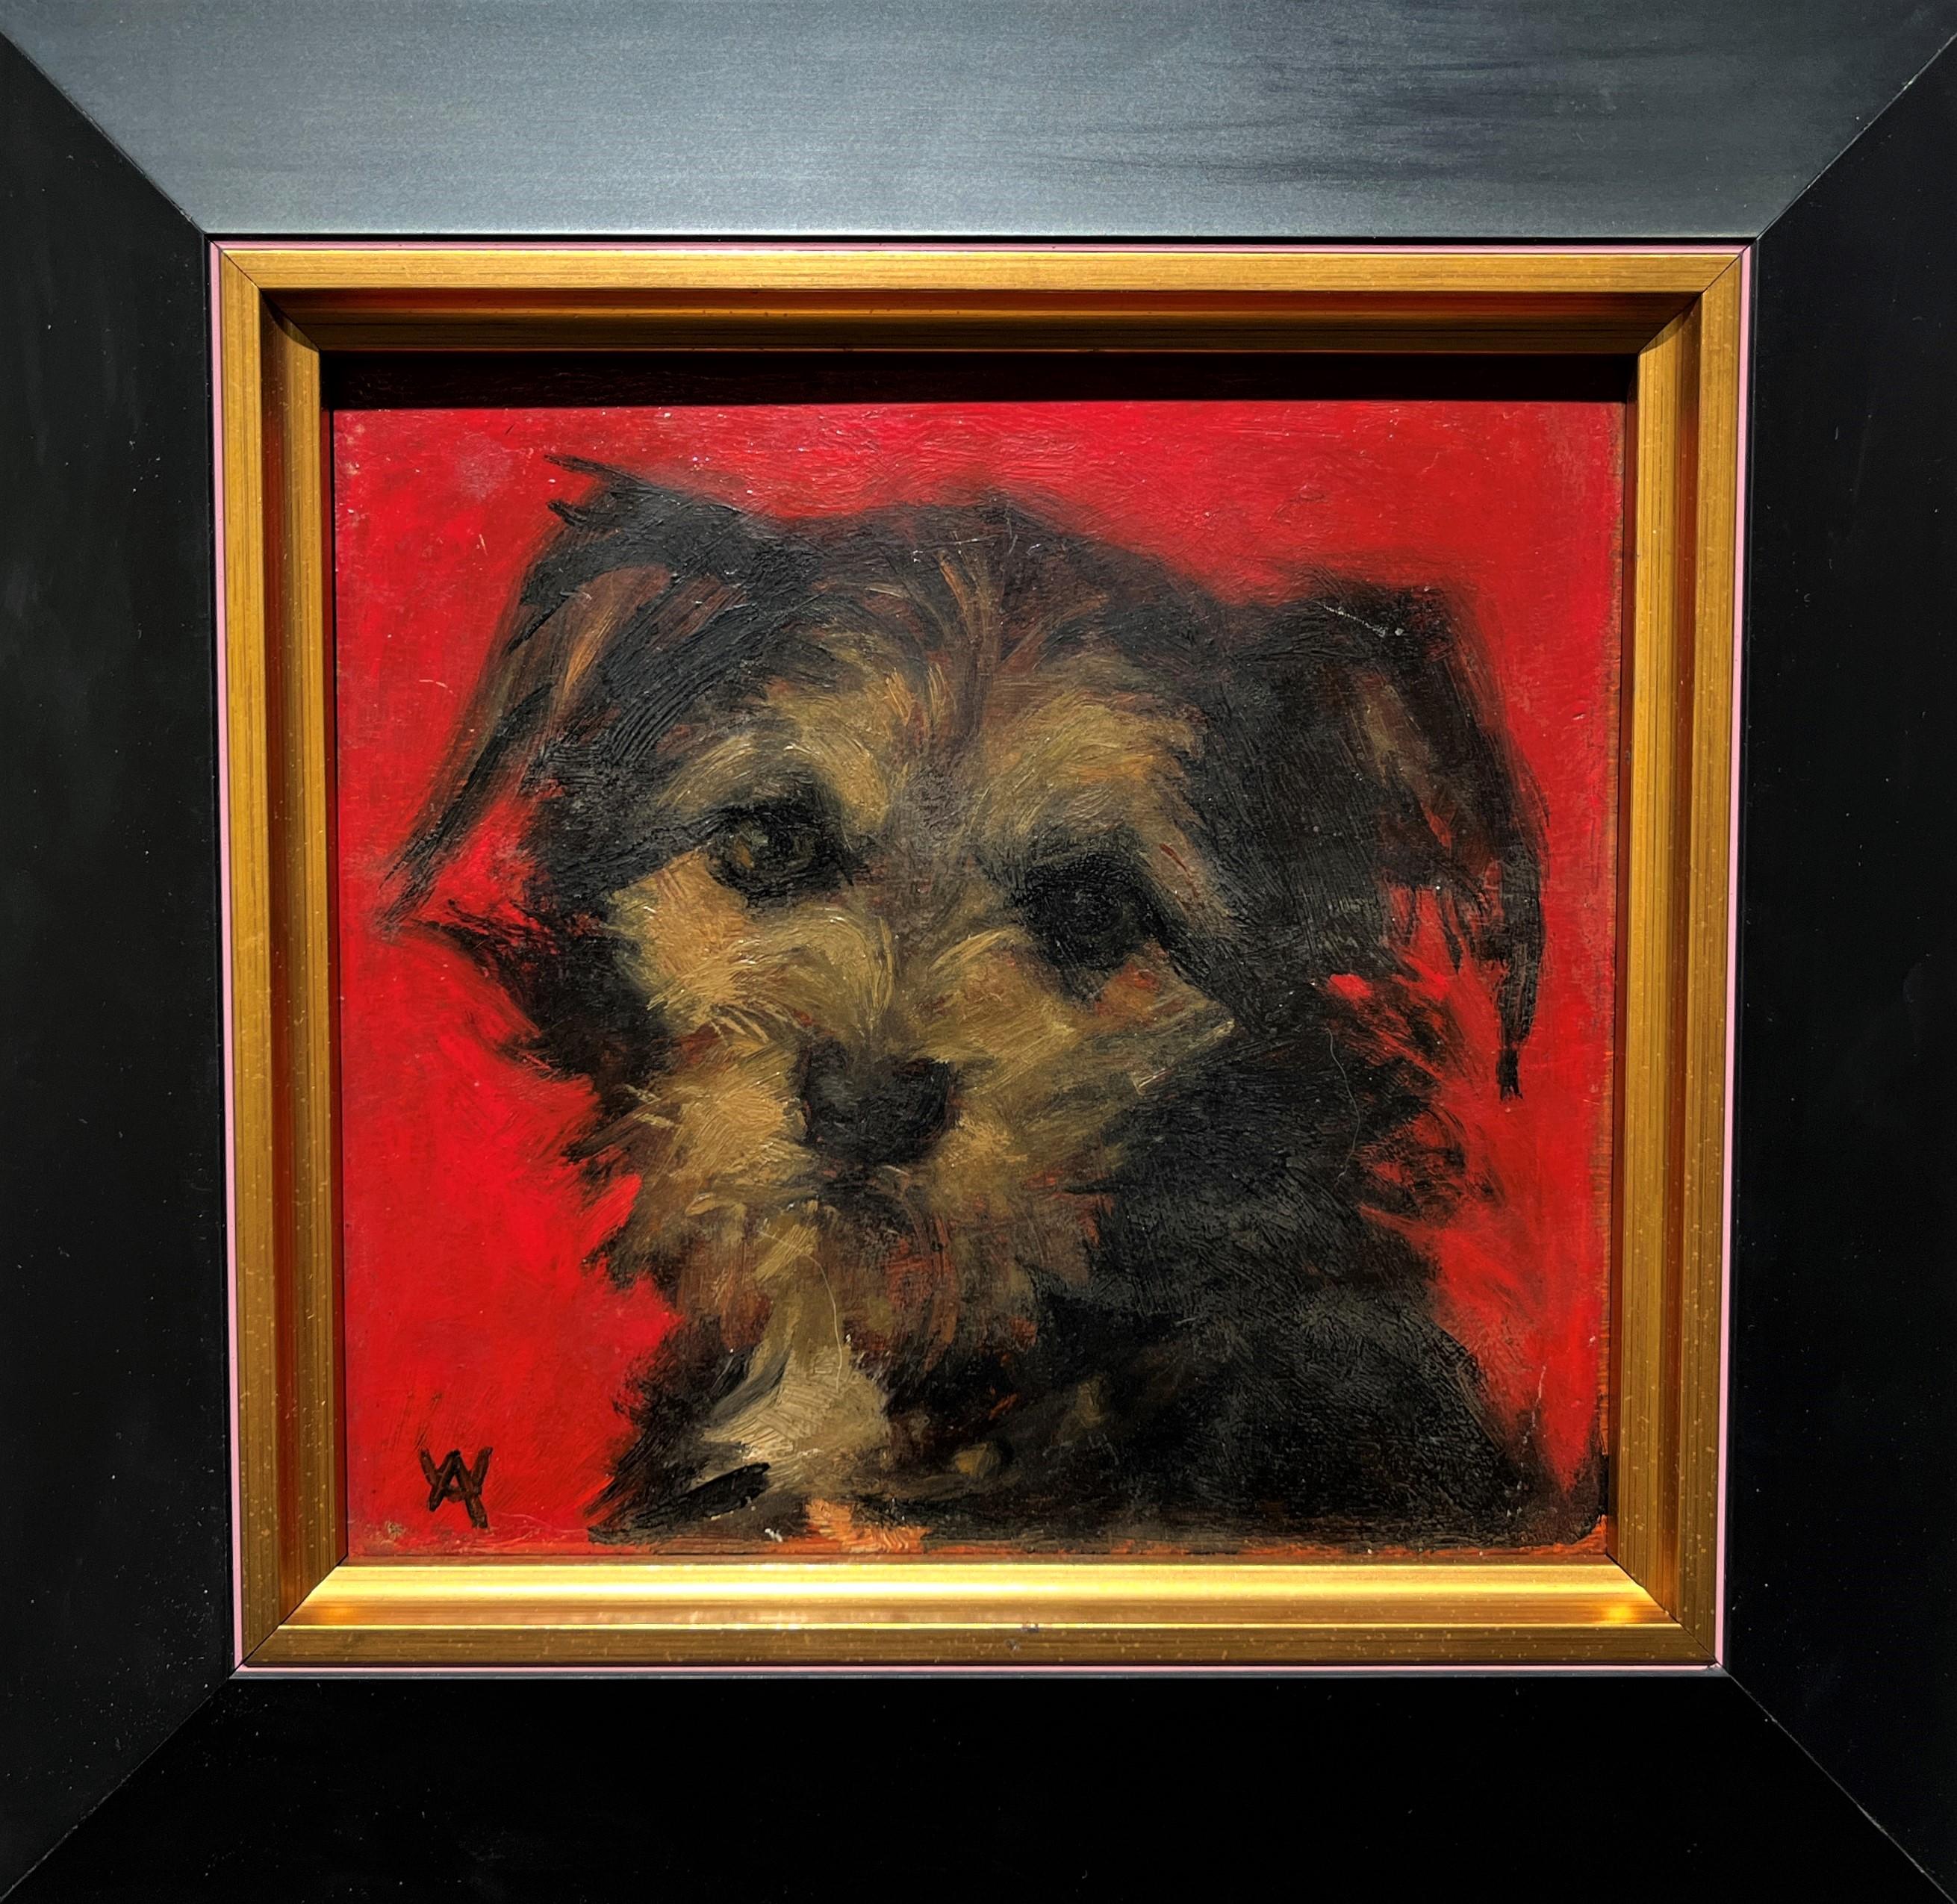 Antique Painting of a Dog: "Red Terrier" circa 1910, European School